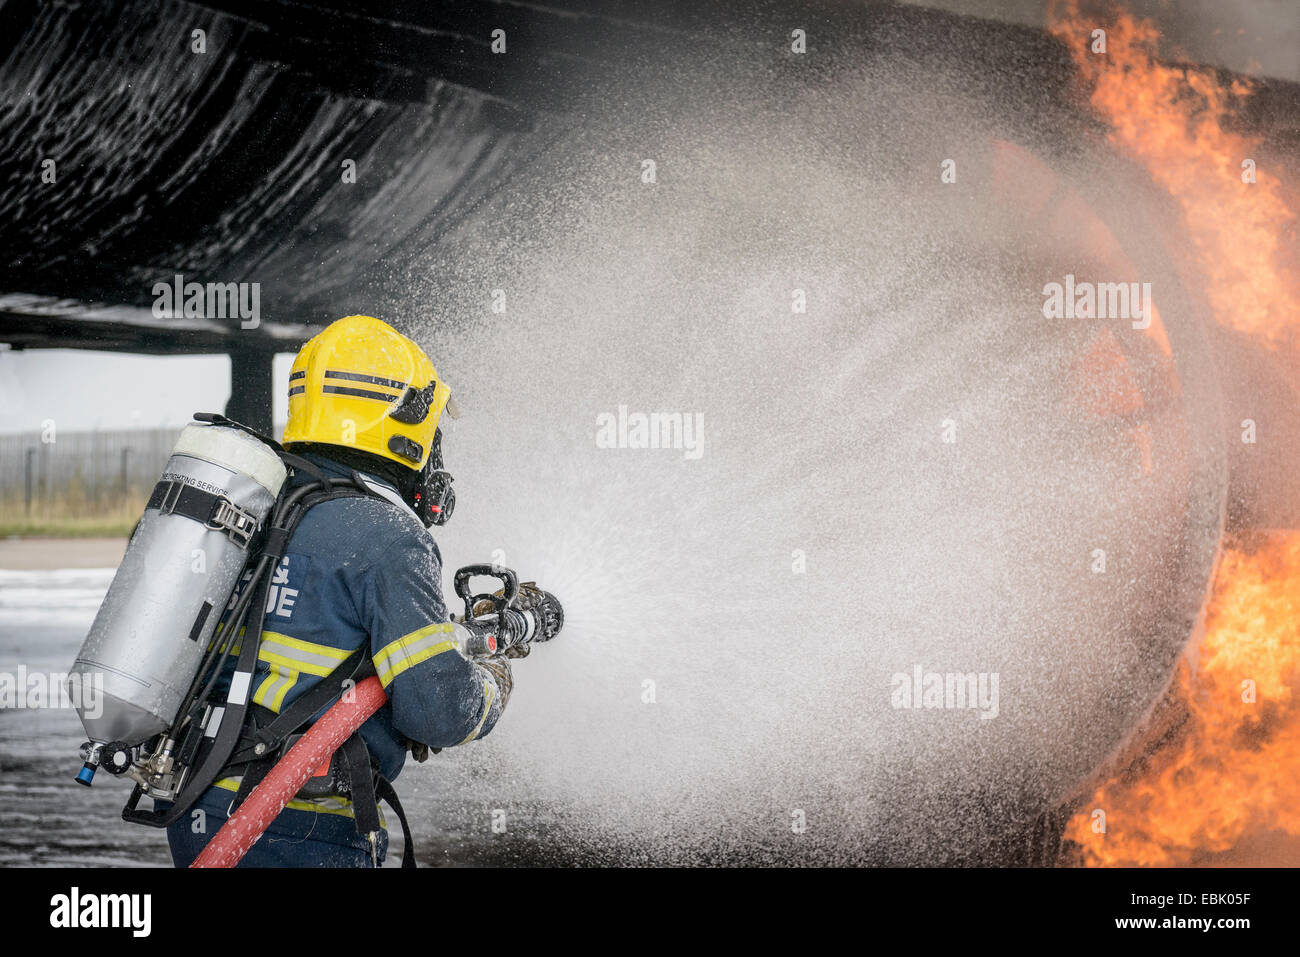 Fireman spraying water on simulated aircraft fire at training facility Stock Photo